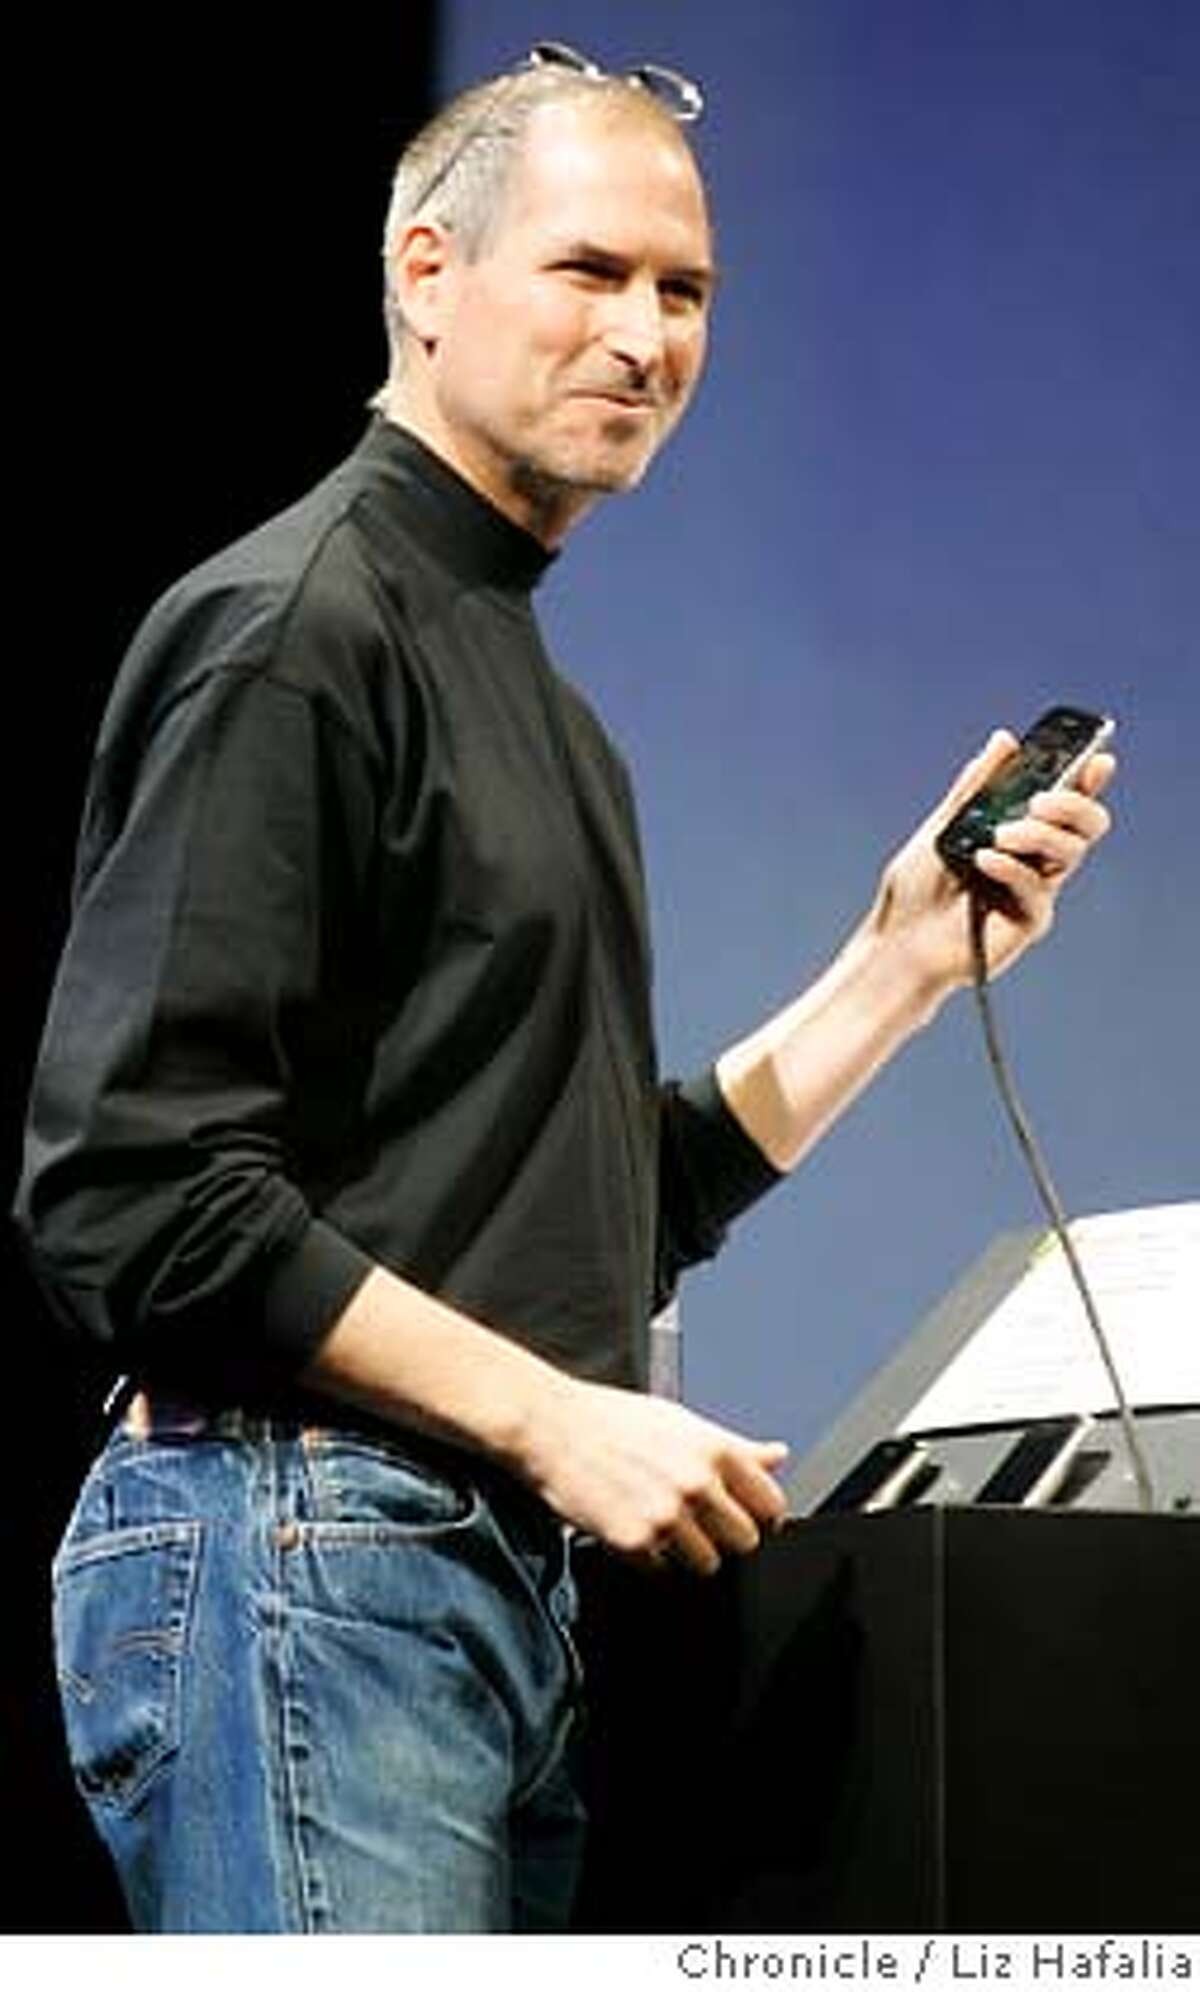 Steve Jobs introduces IPhone at the keynote address in Moscone West. Photographed by Liz Hafalia